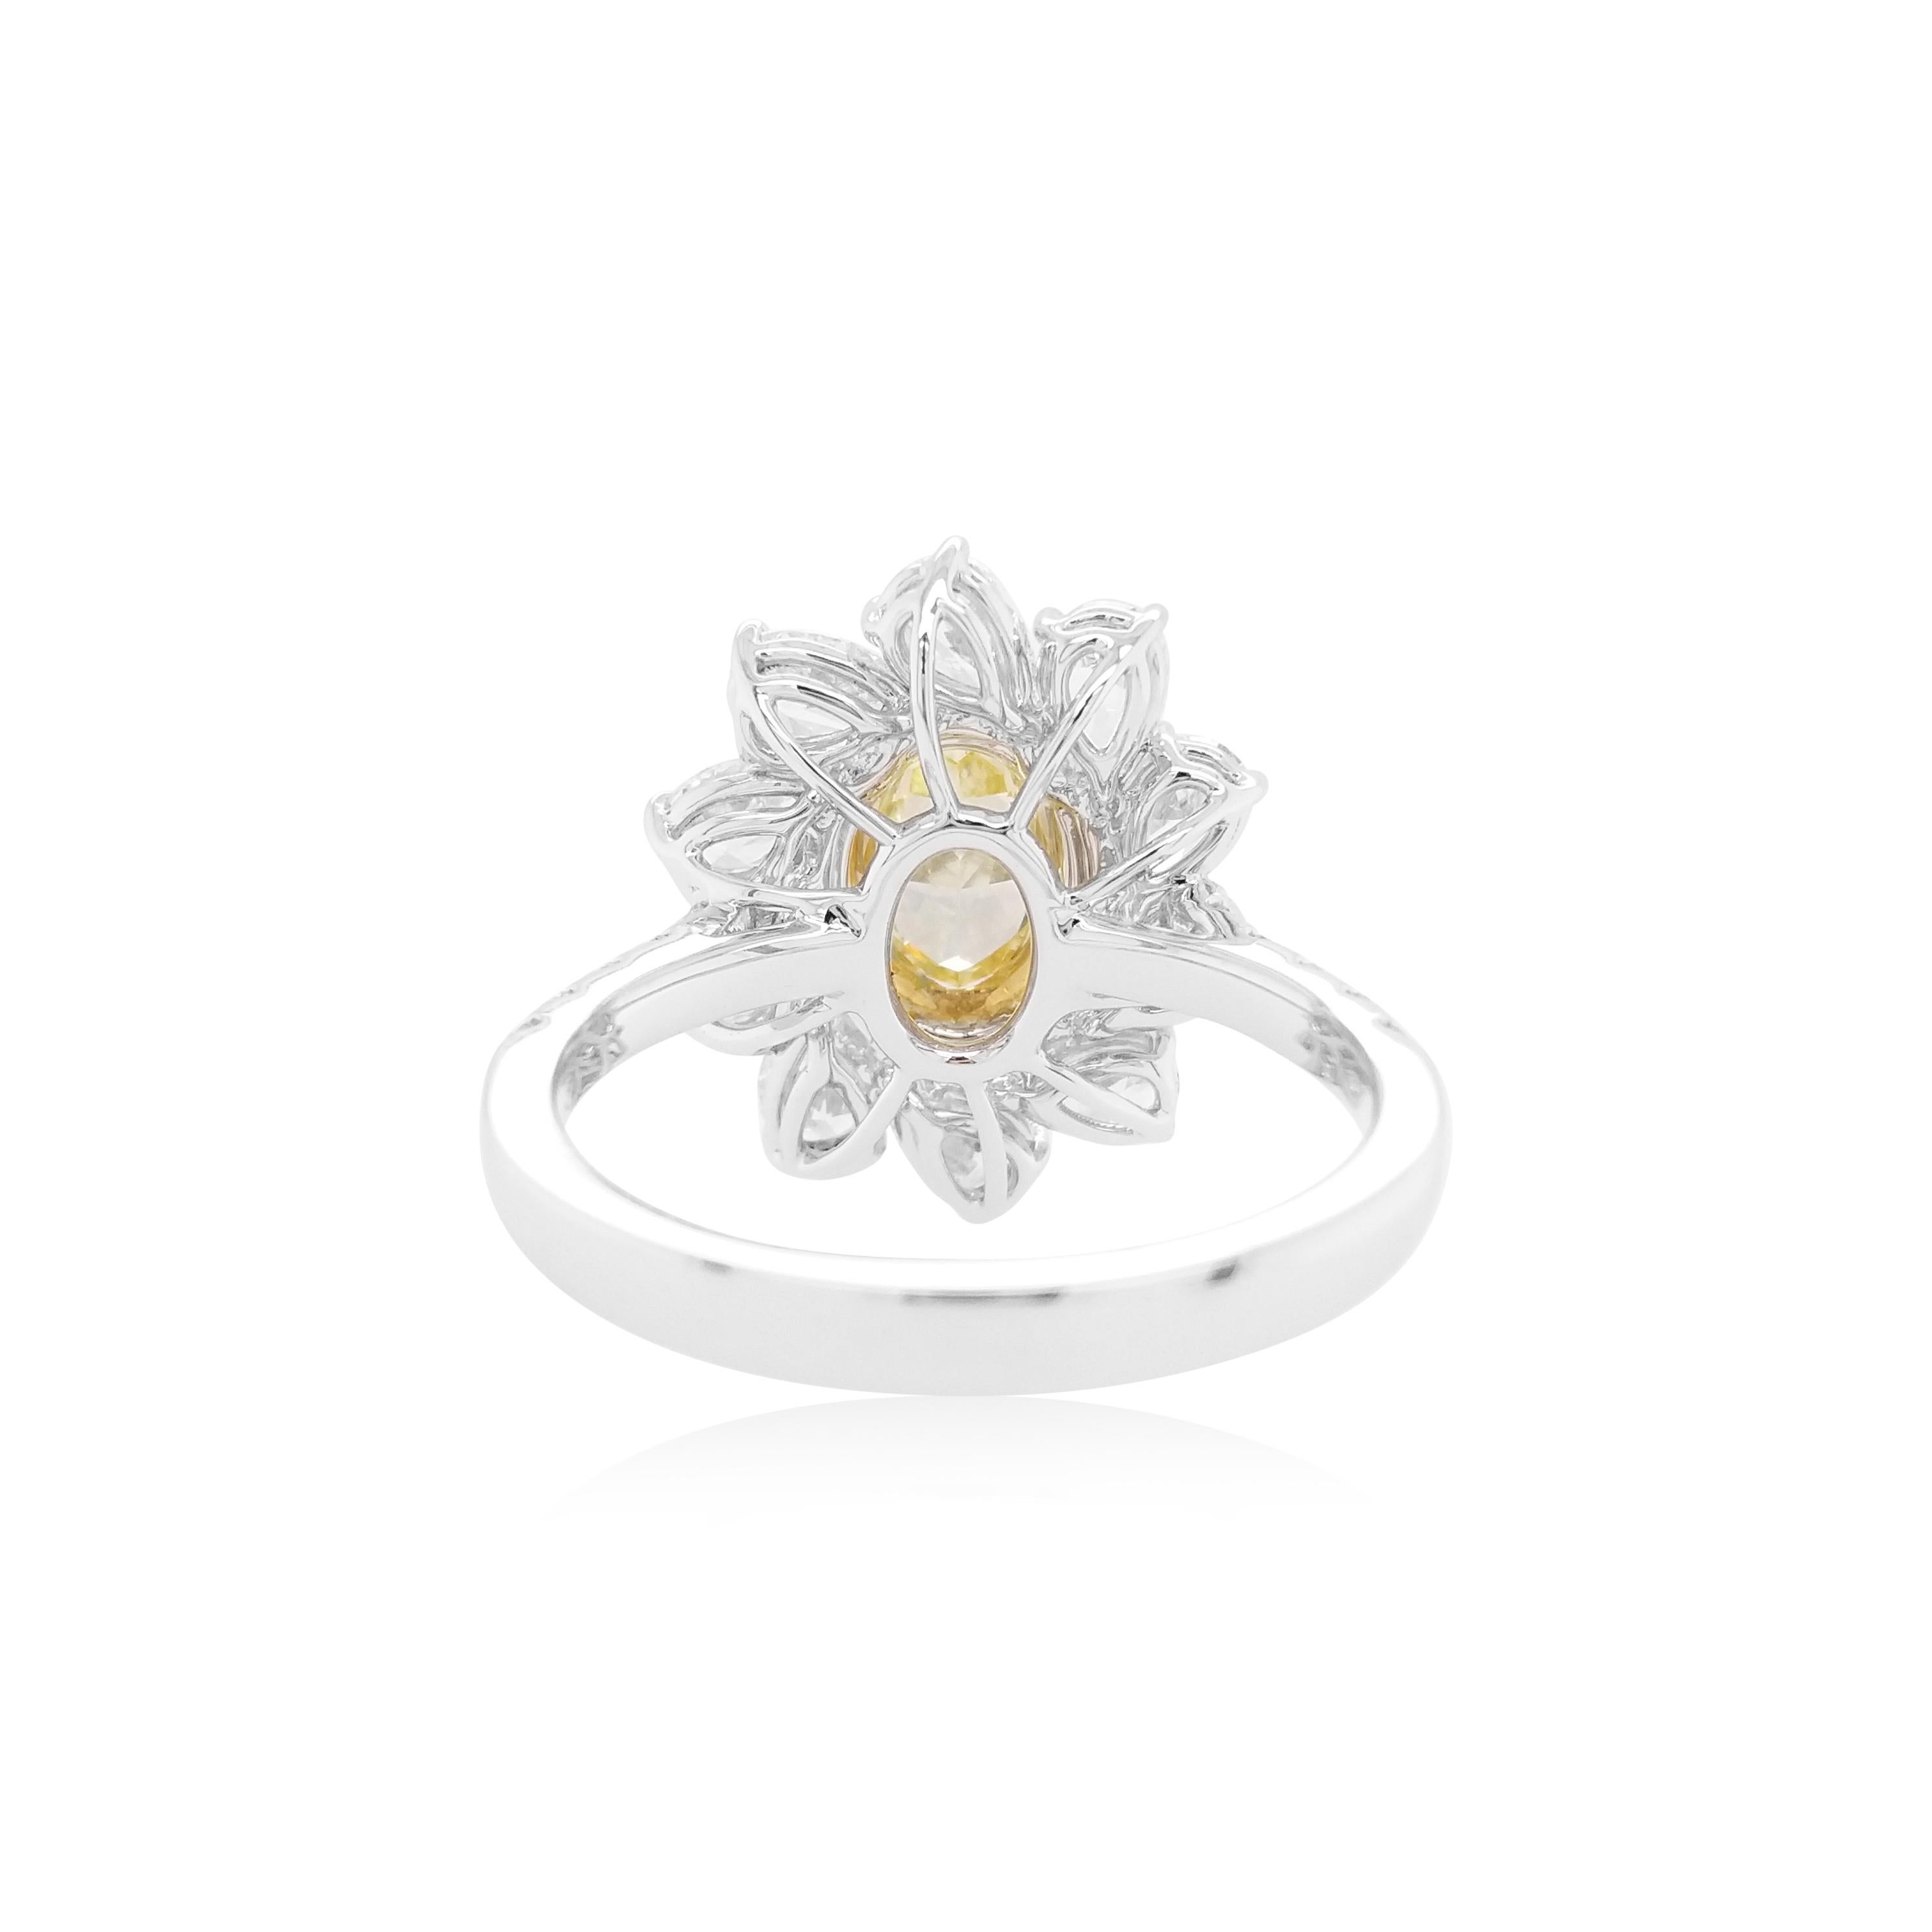 This exclusive Engagement ring features a luscious Yellow diamond at the heart of the design, by framing an ornate arrangement of delicate pear-shaped white diamonds set in 18K gold. Bold and striking, this unique ring is the perfect statement piece